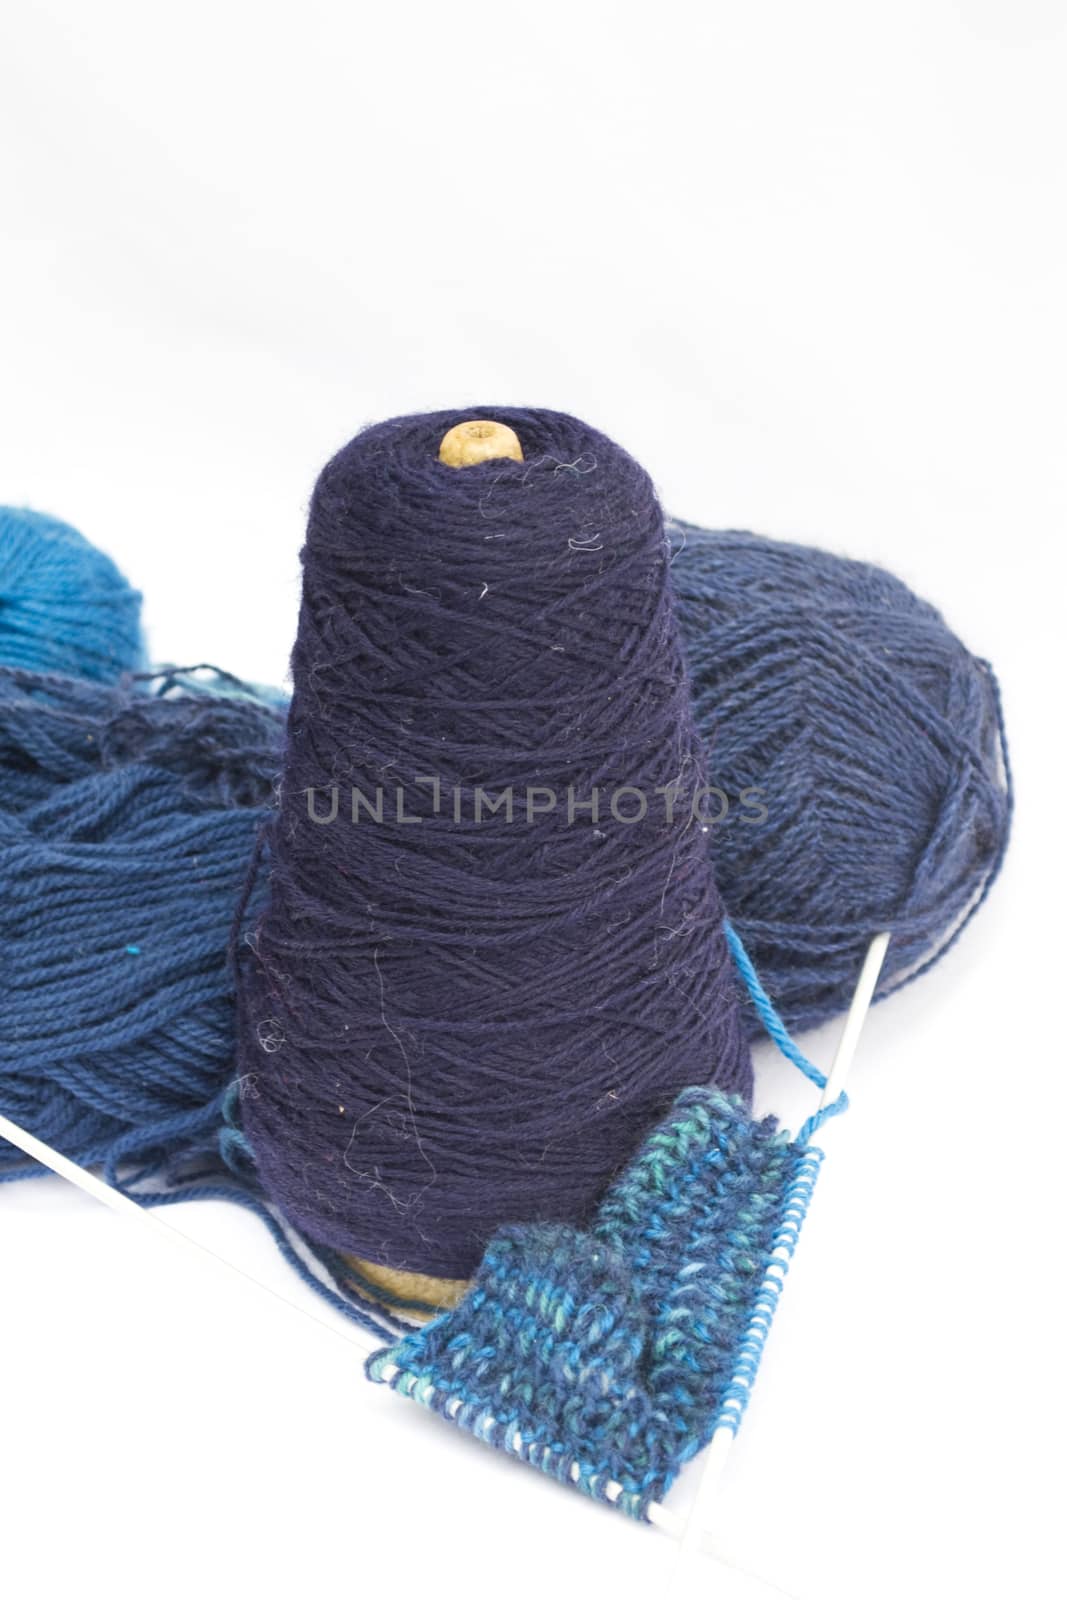 Cone of blue wool with knitting needles on a white background